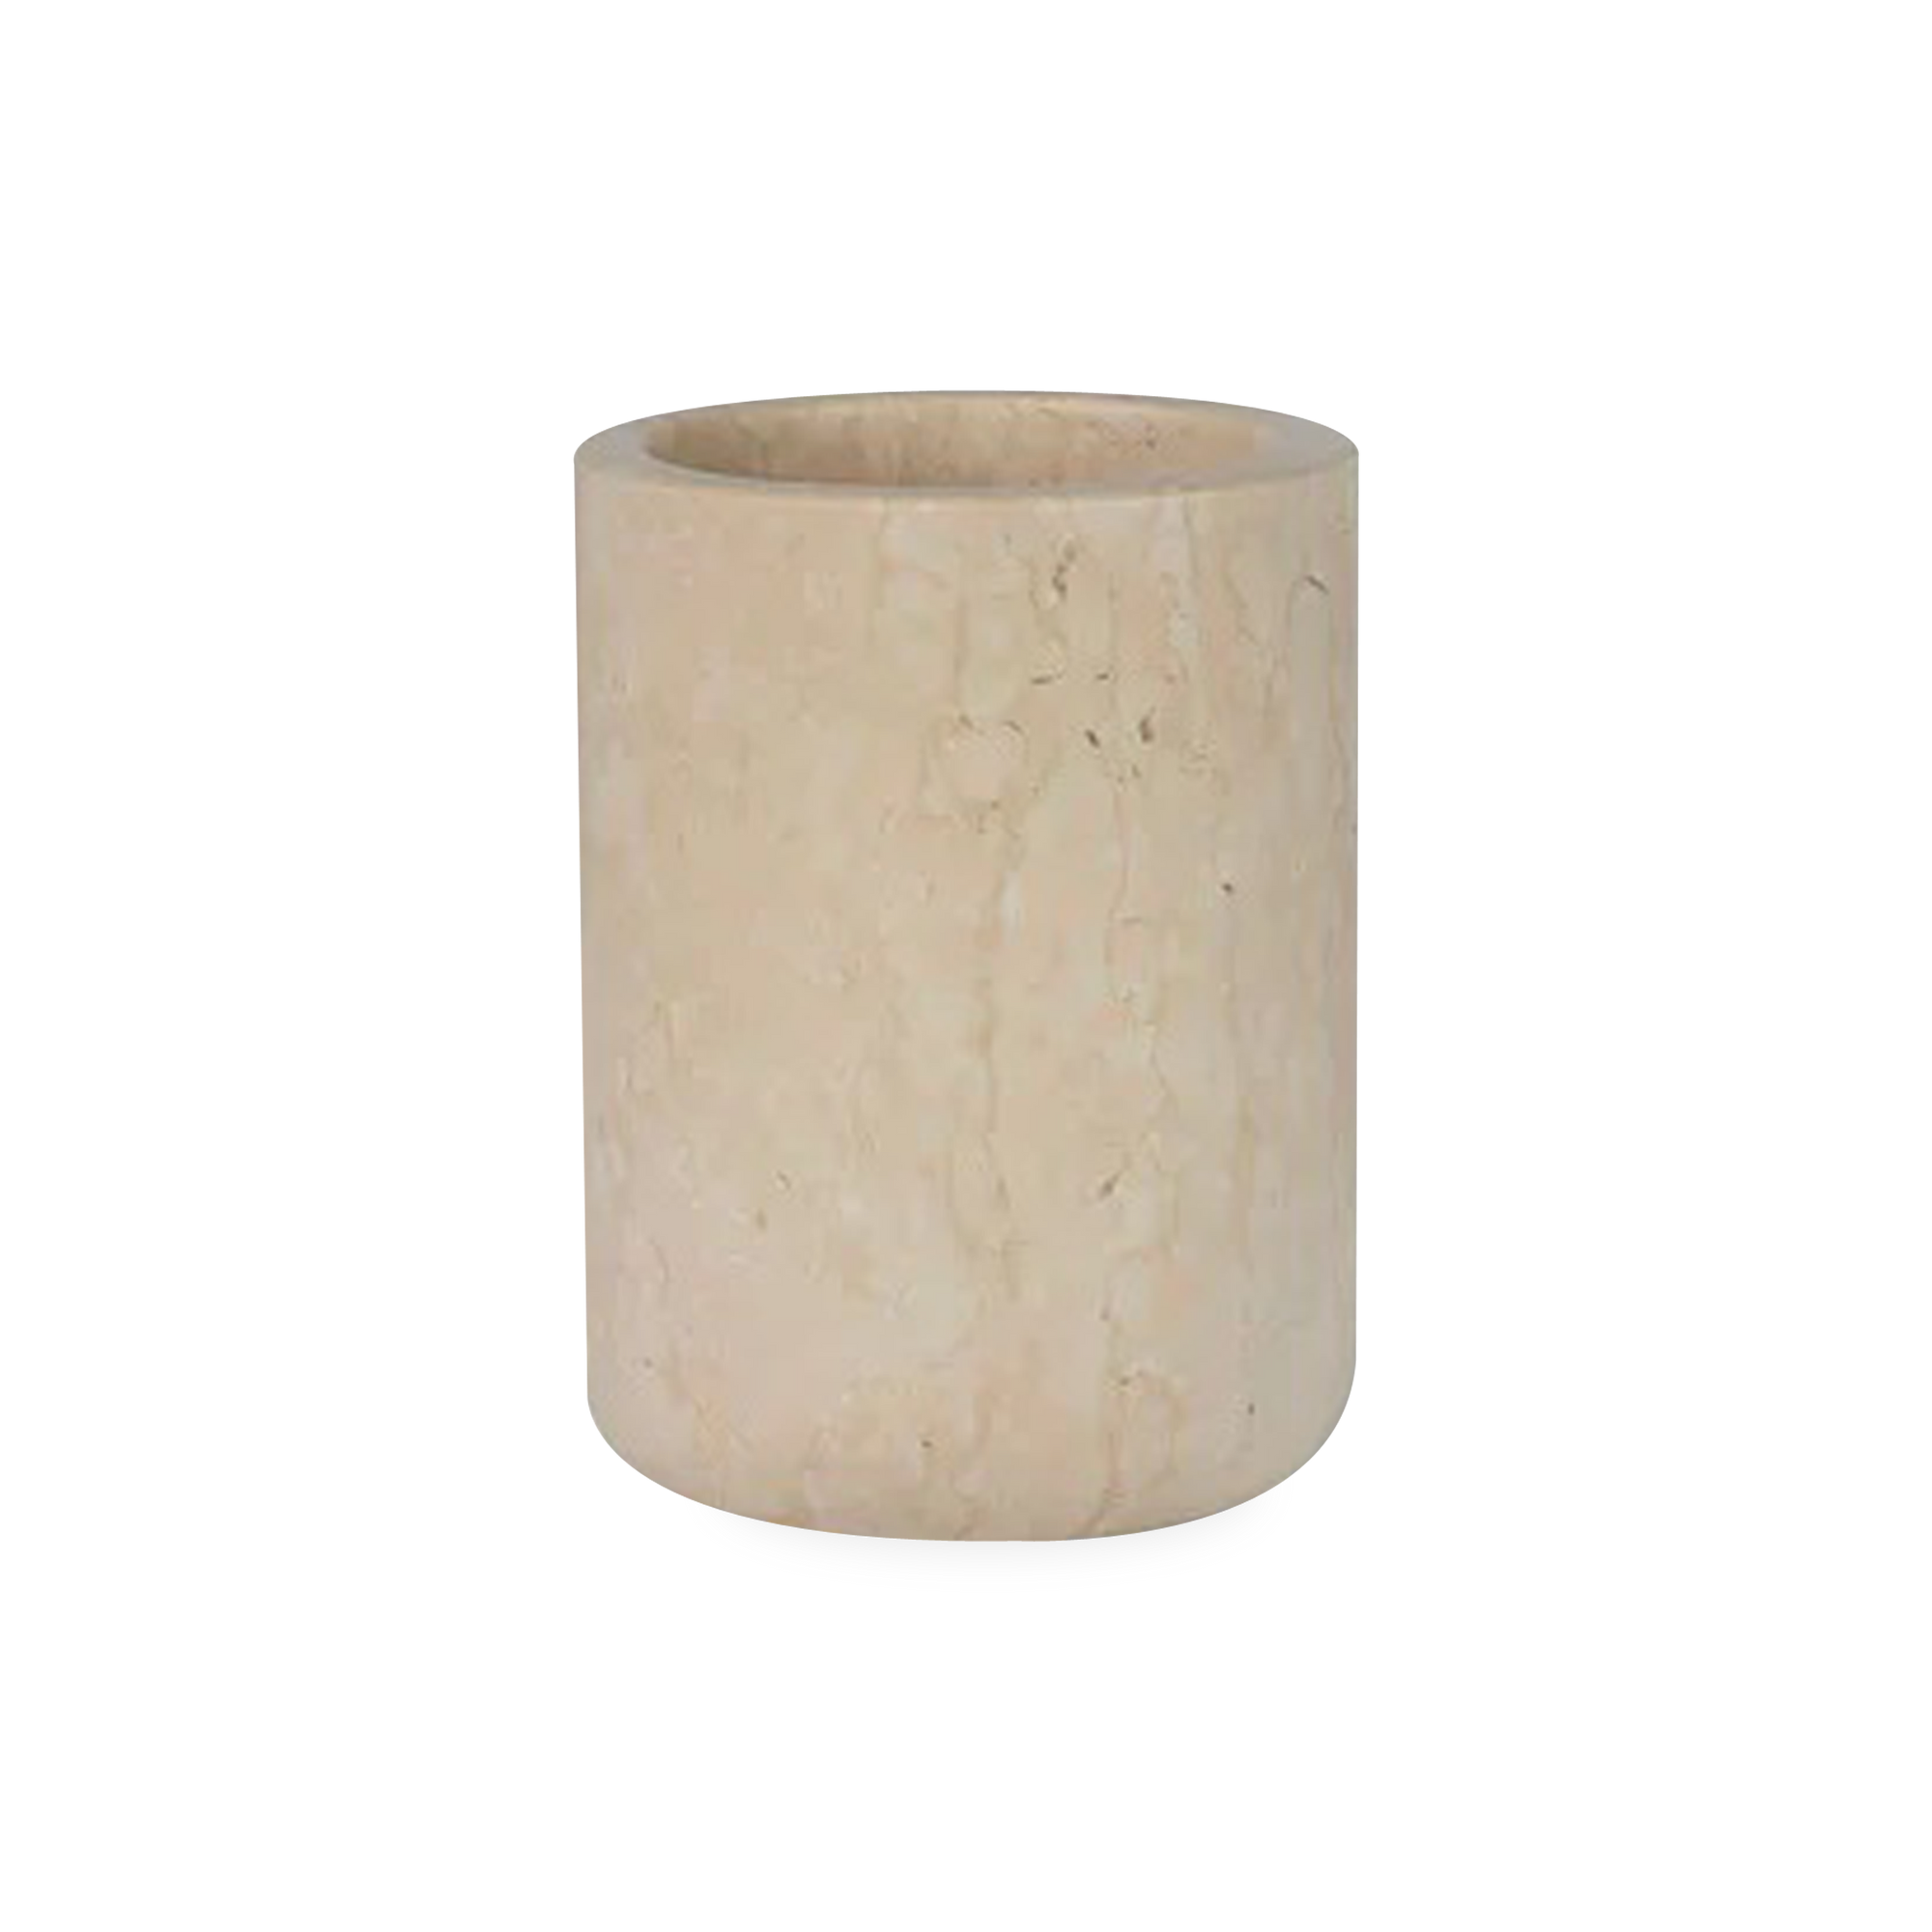 Bringing a luxurious atmosphere into your bathroom with the Marble Tumbler, this tumbler features an elegant cylindrical silhouette with soft edges.